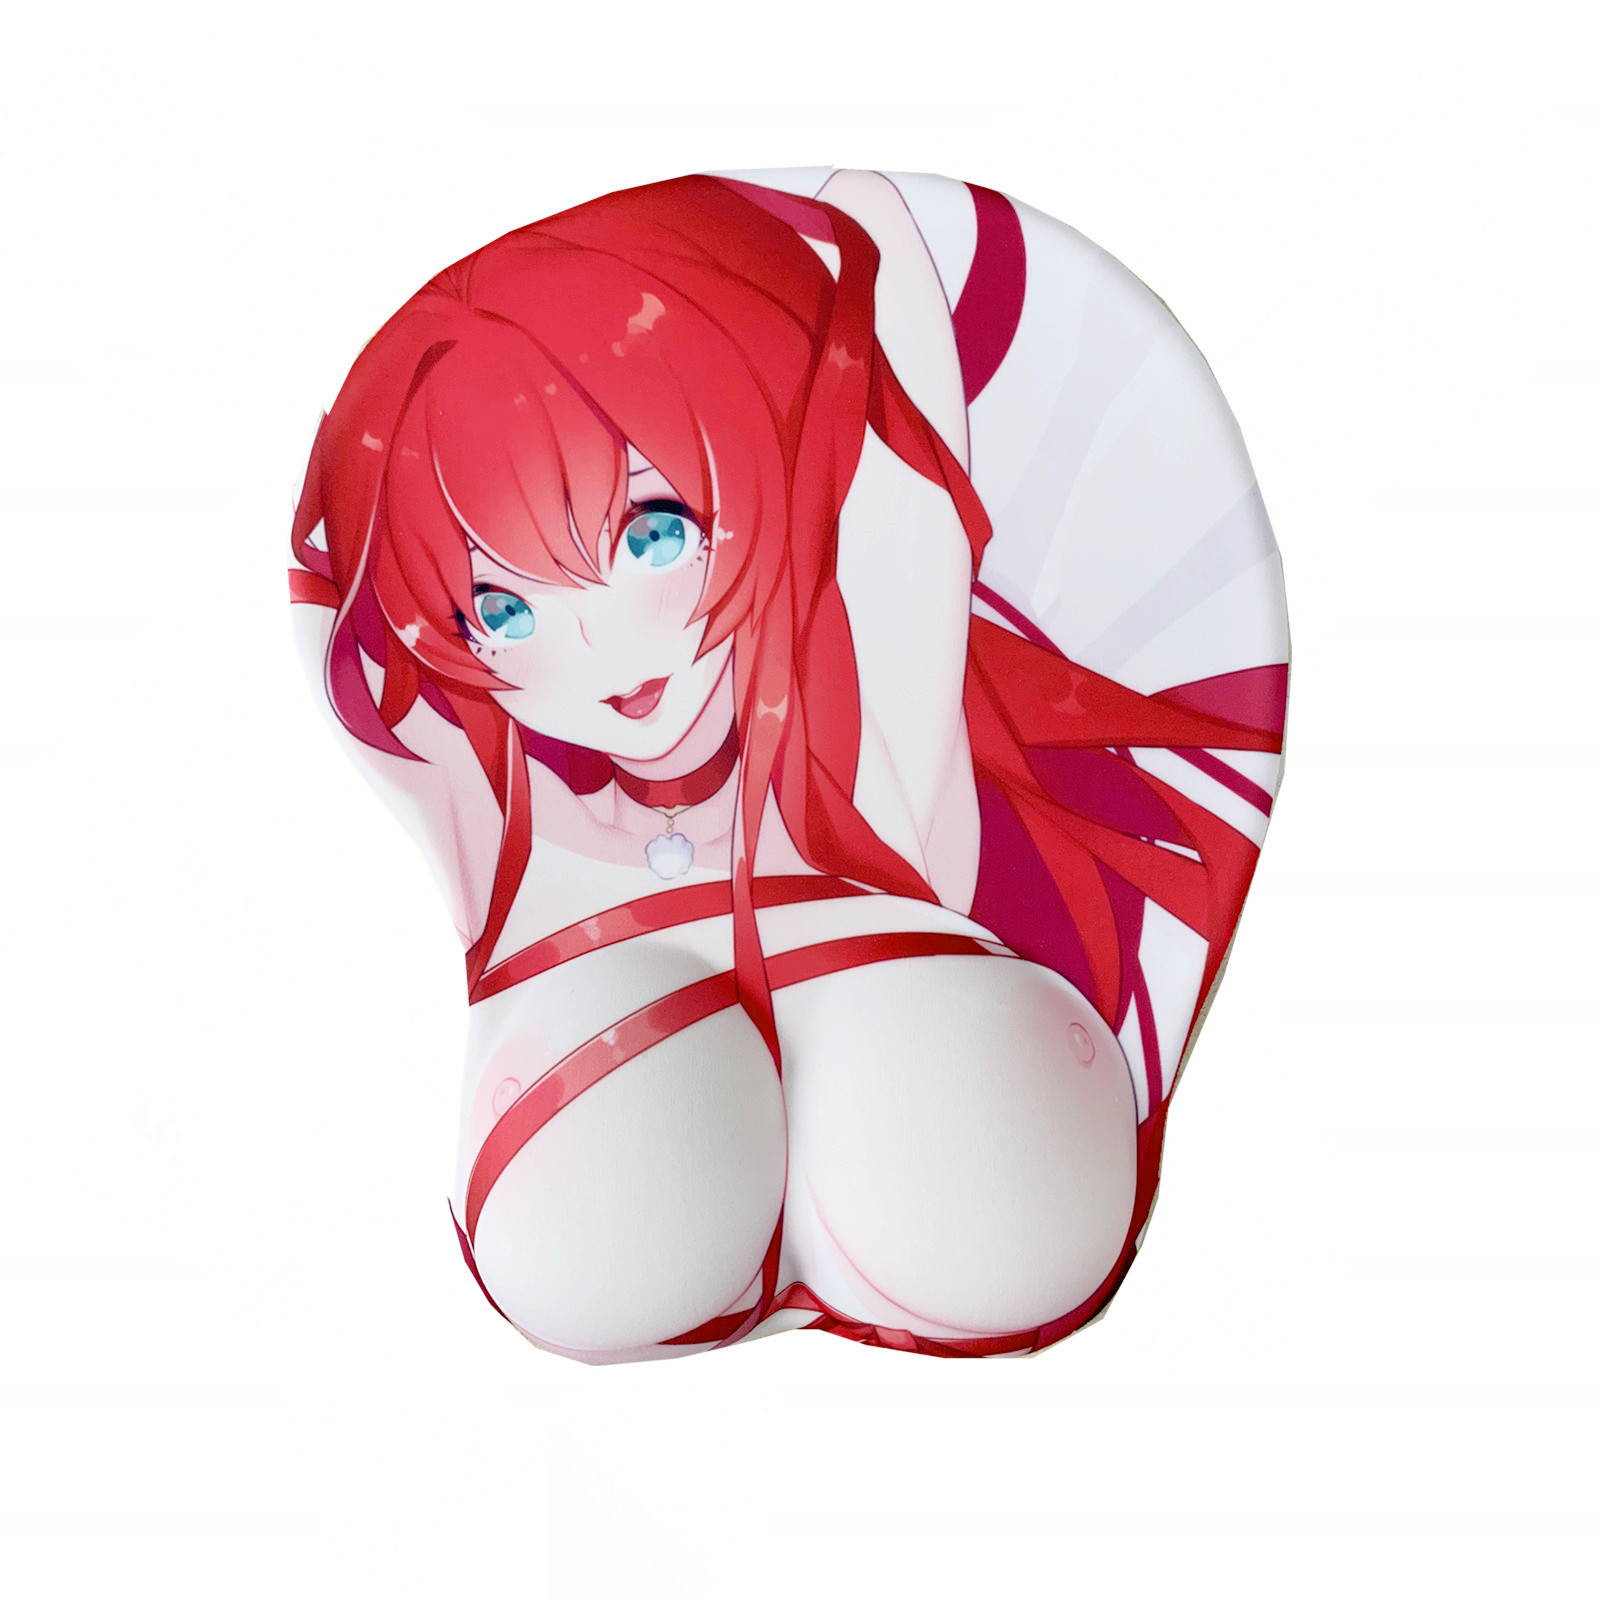 Rias Gremory High School DxD Anime 3D Mouse Pads Soft Breast Sexy Butt Wrist Rest Oppai